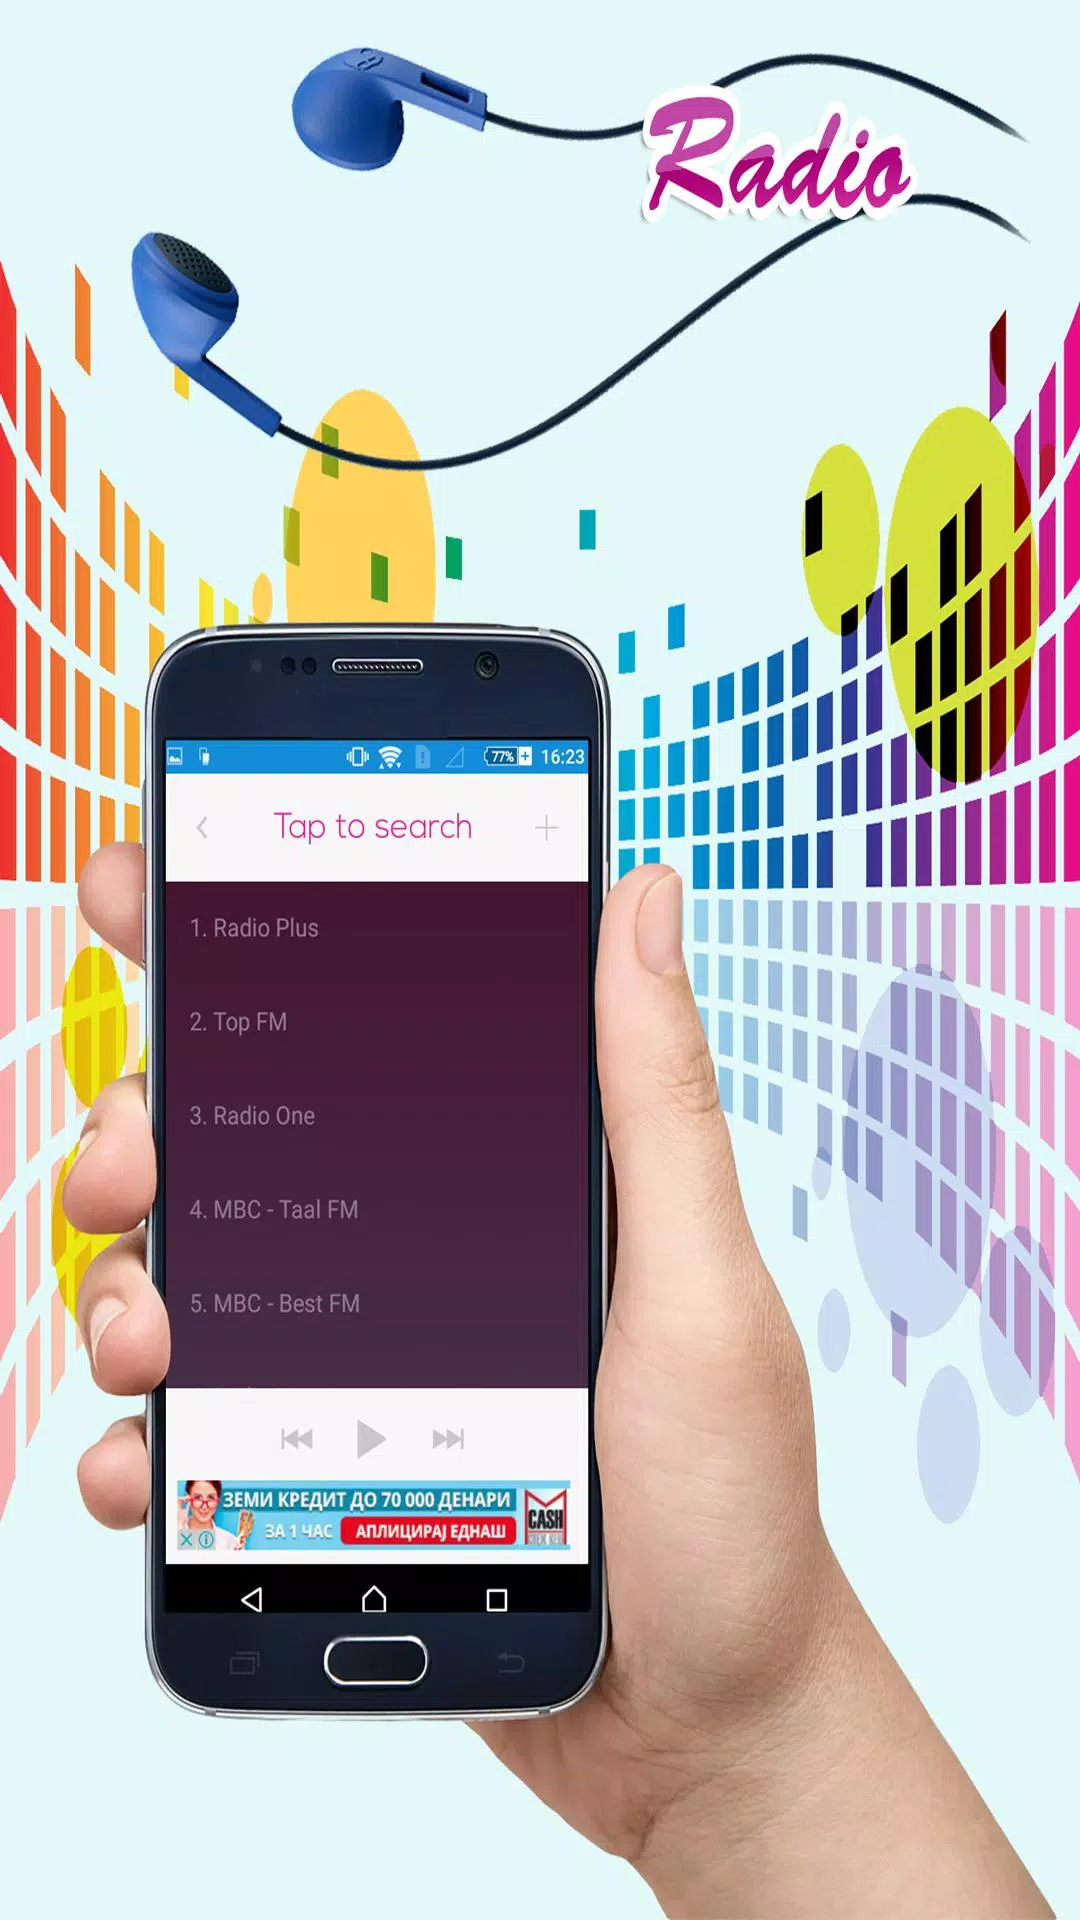 Mauritius Radio APK for Android Download